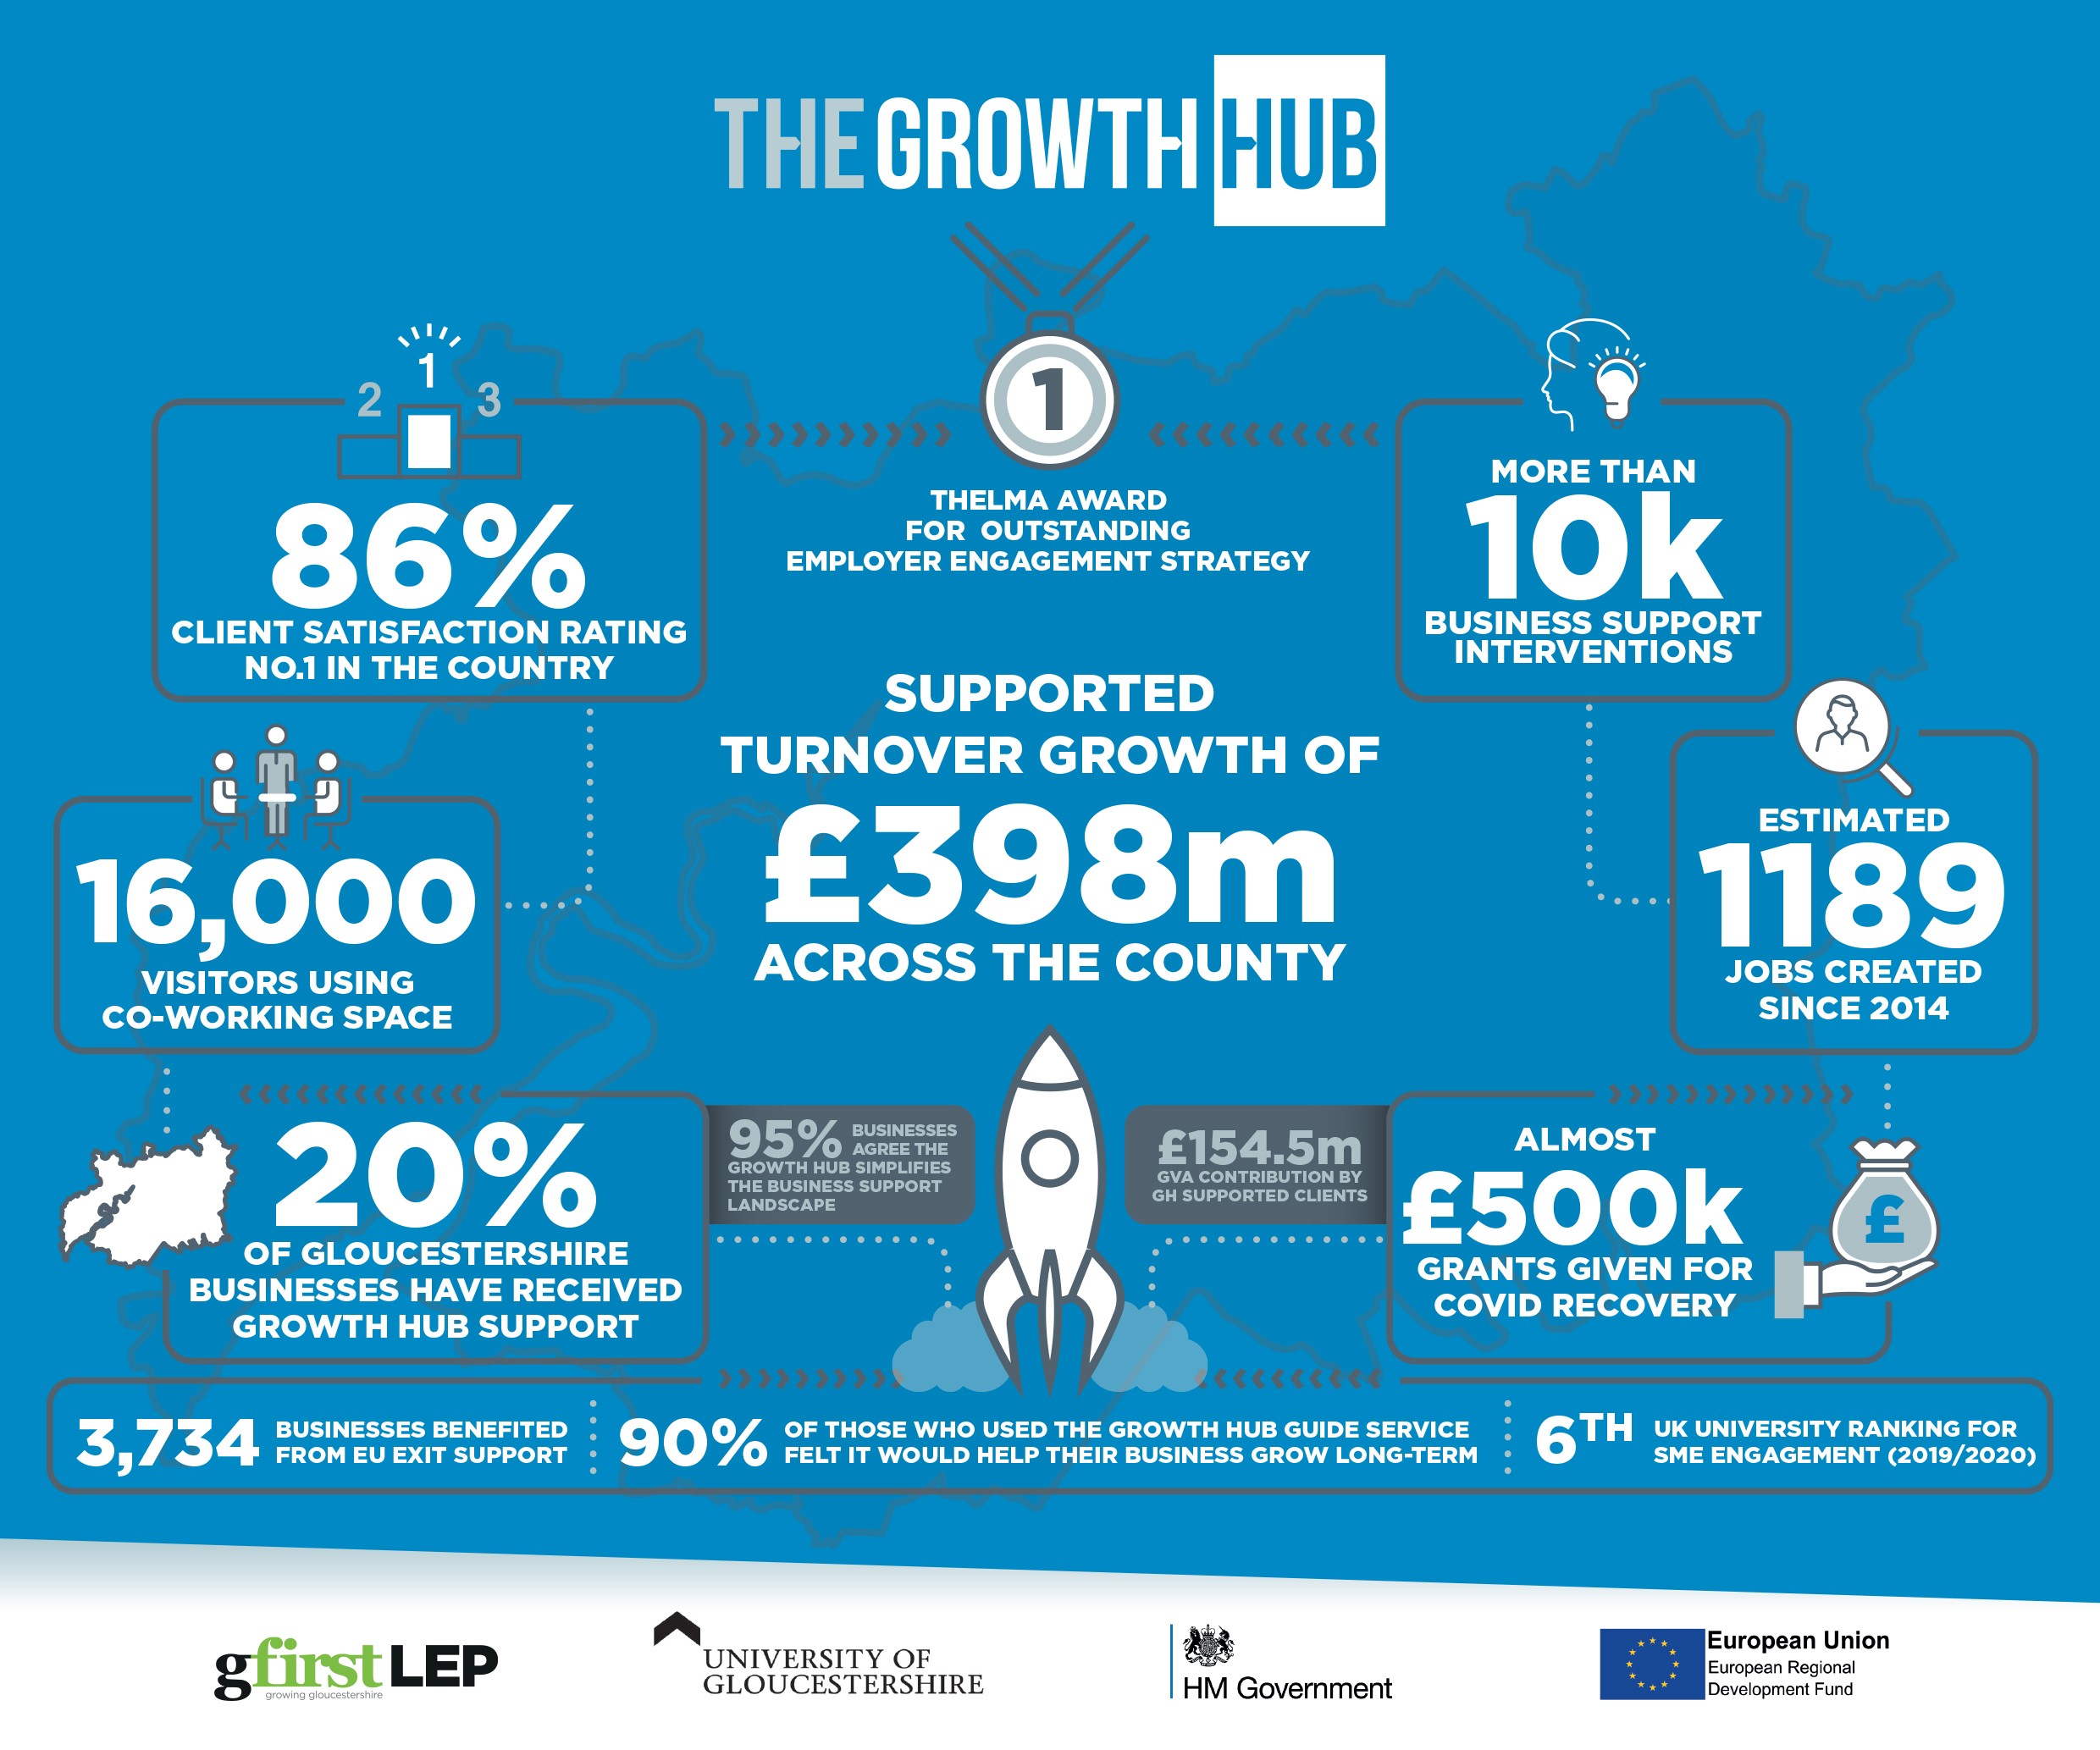 Growth Hub is supporting growth in jobs, turnover and value added, says independent report